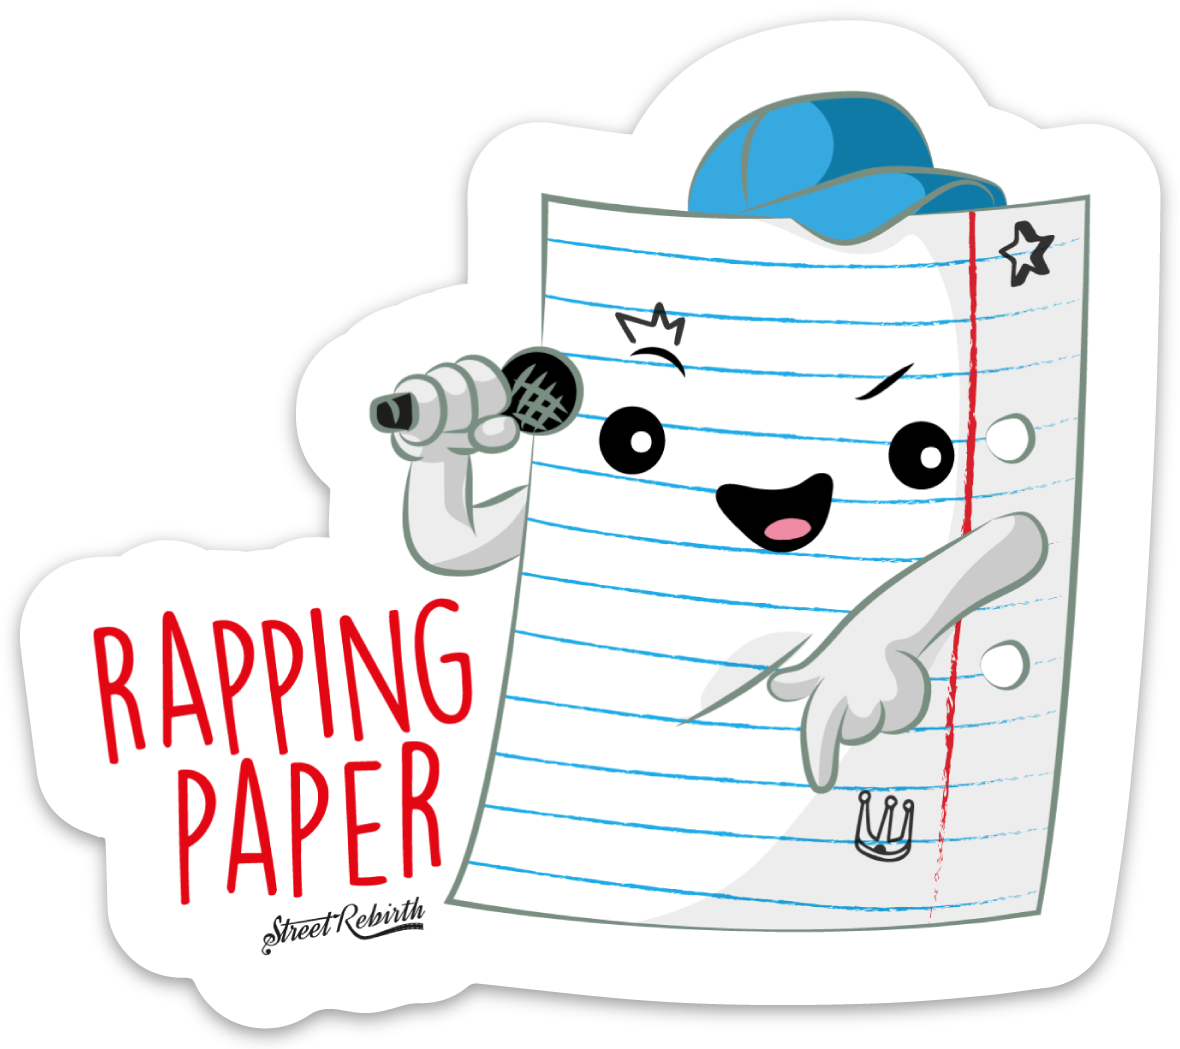 Rapping Paper PUN STICKER – ONE 4 INCH WATER PROOF VINYL STICKER – FOR HYDRO FLASK, SKATEBOARD, LAPTOP, PLANNER, CAR, COLLECTING, GIFTING